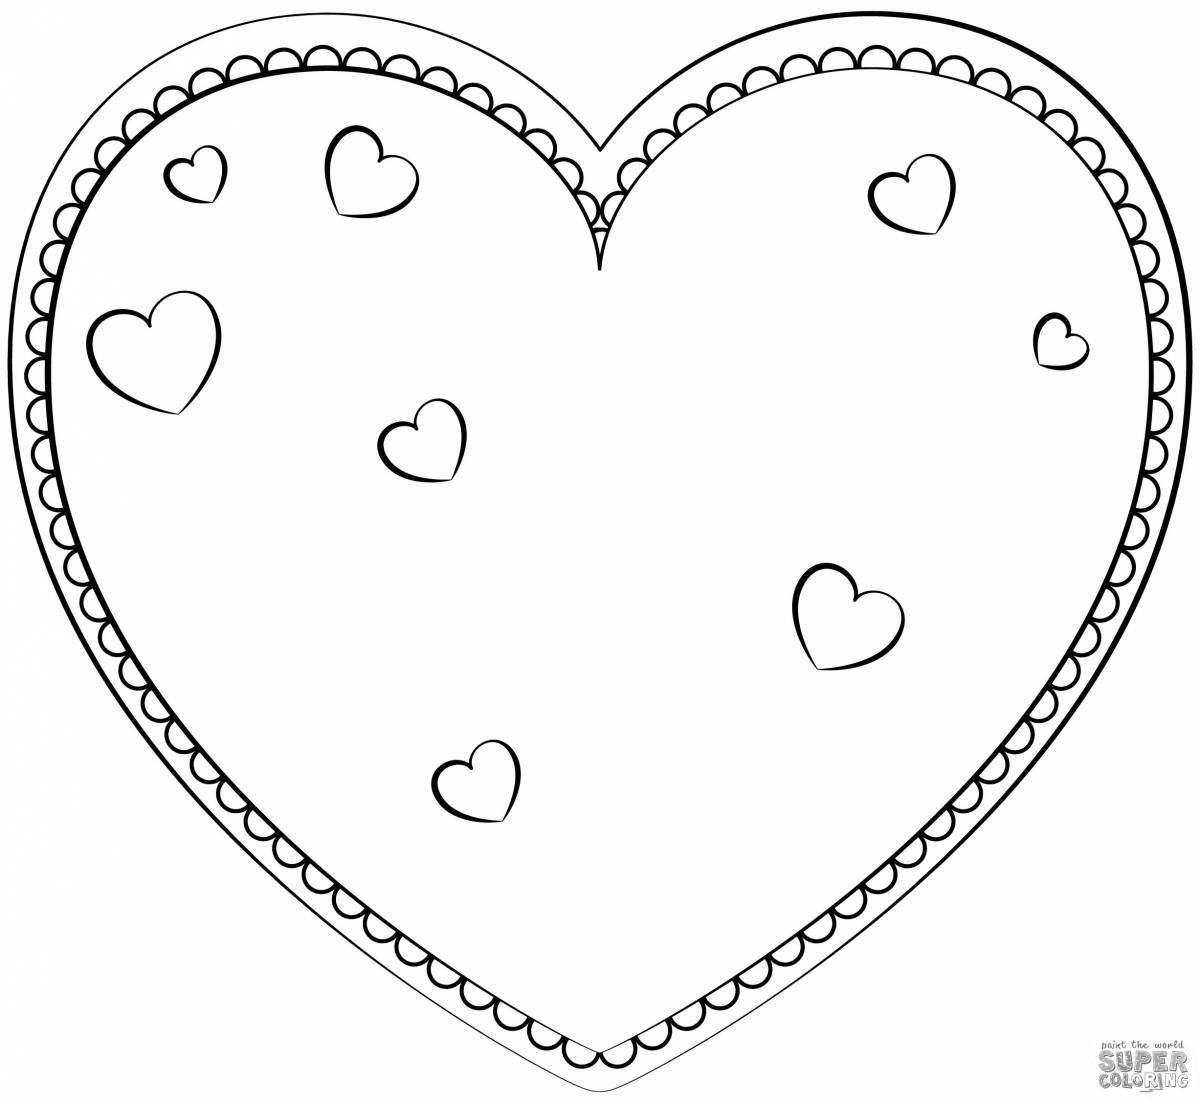 Fun heart coloring book for 5-6 year olds